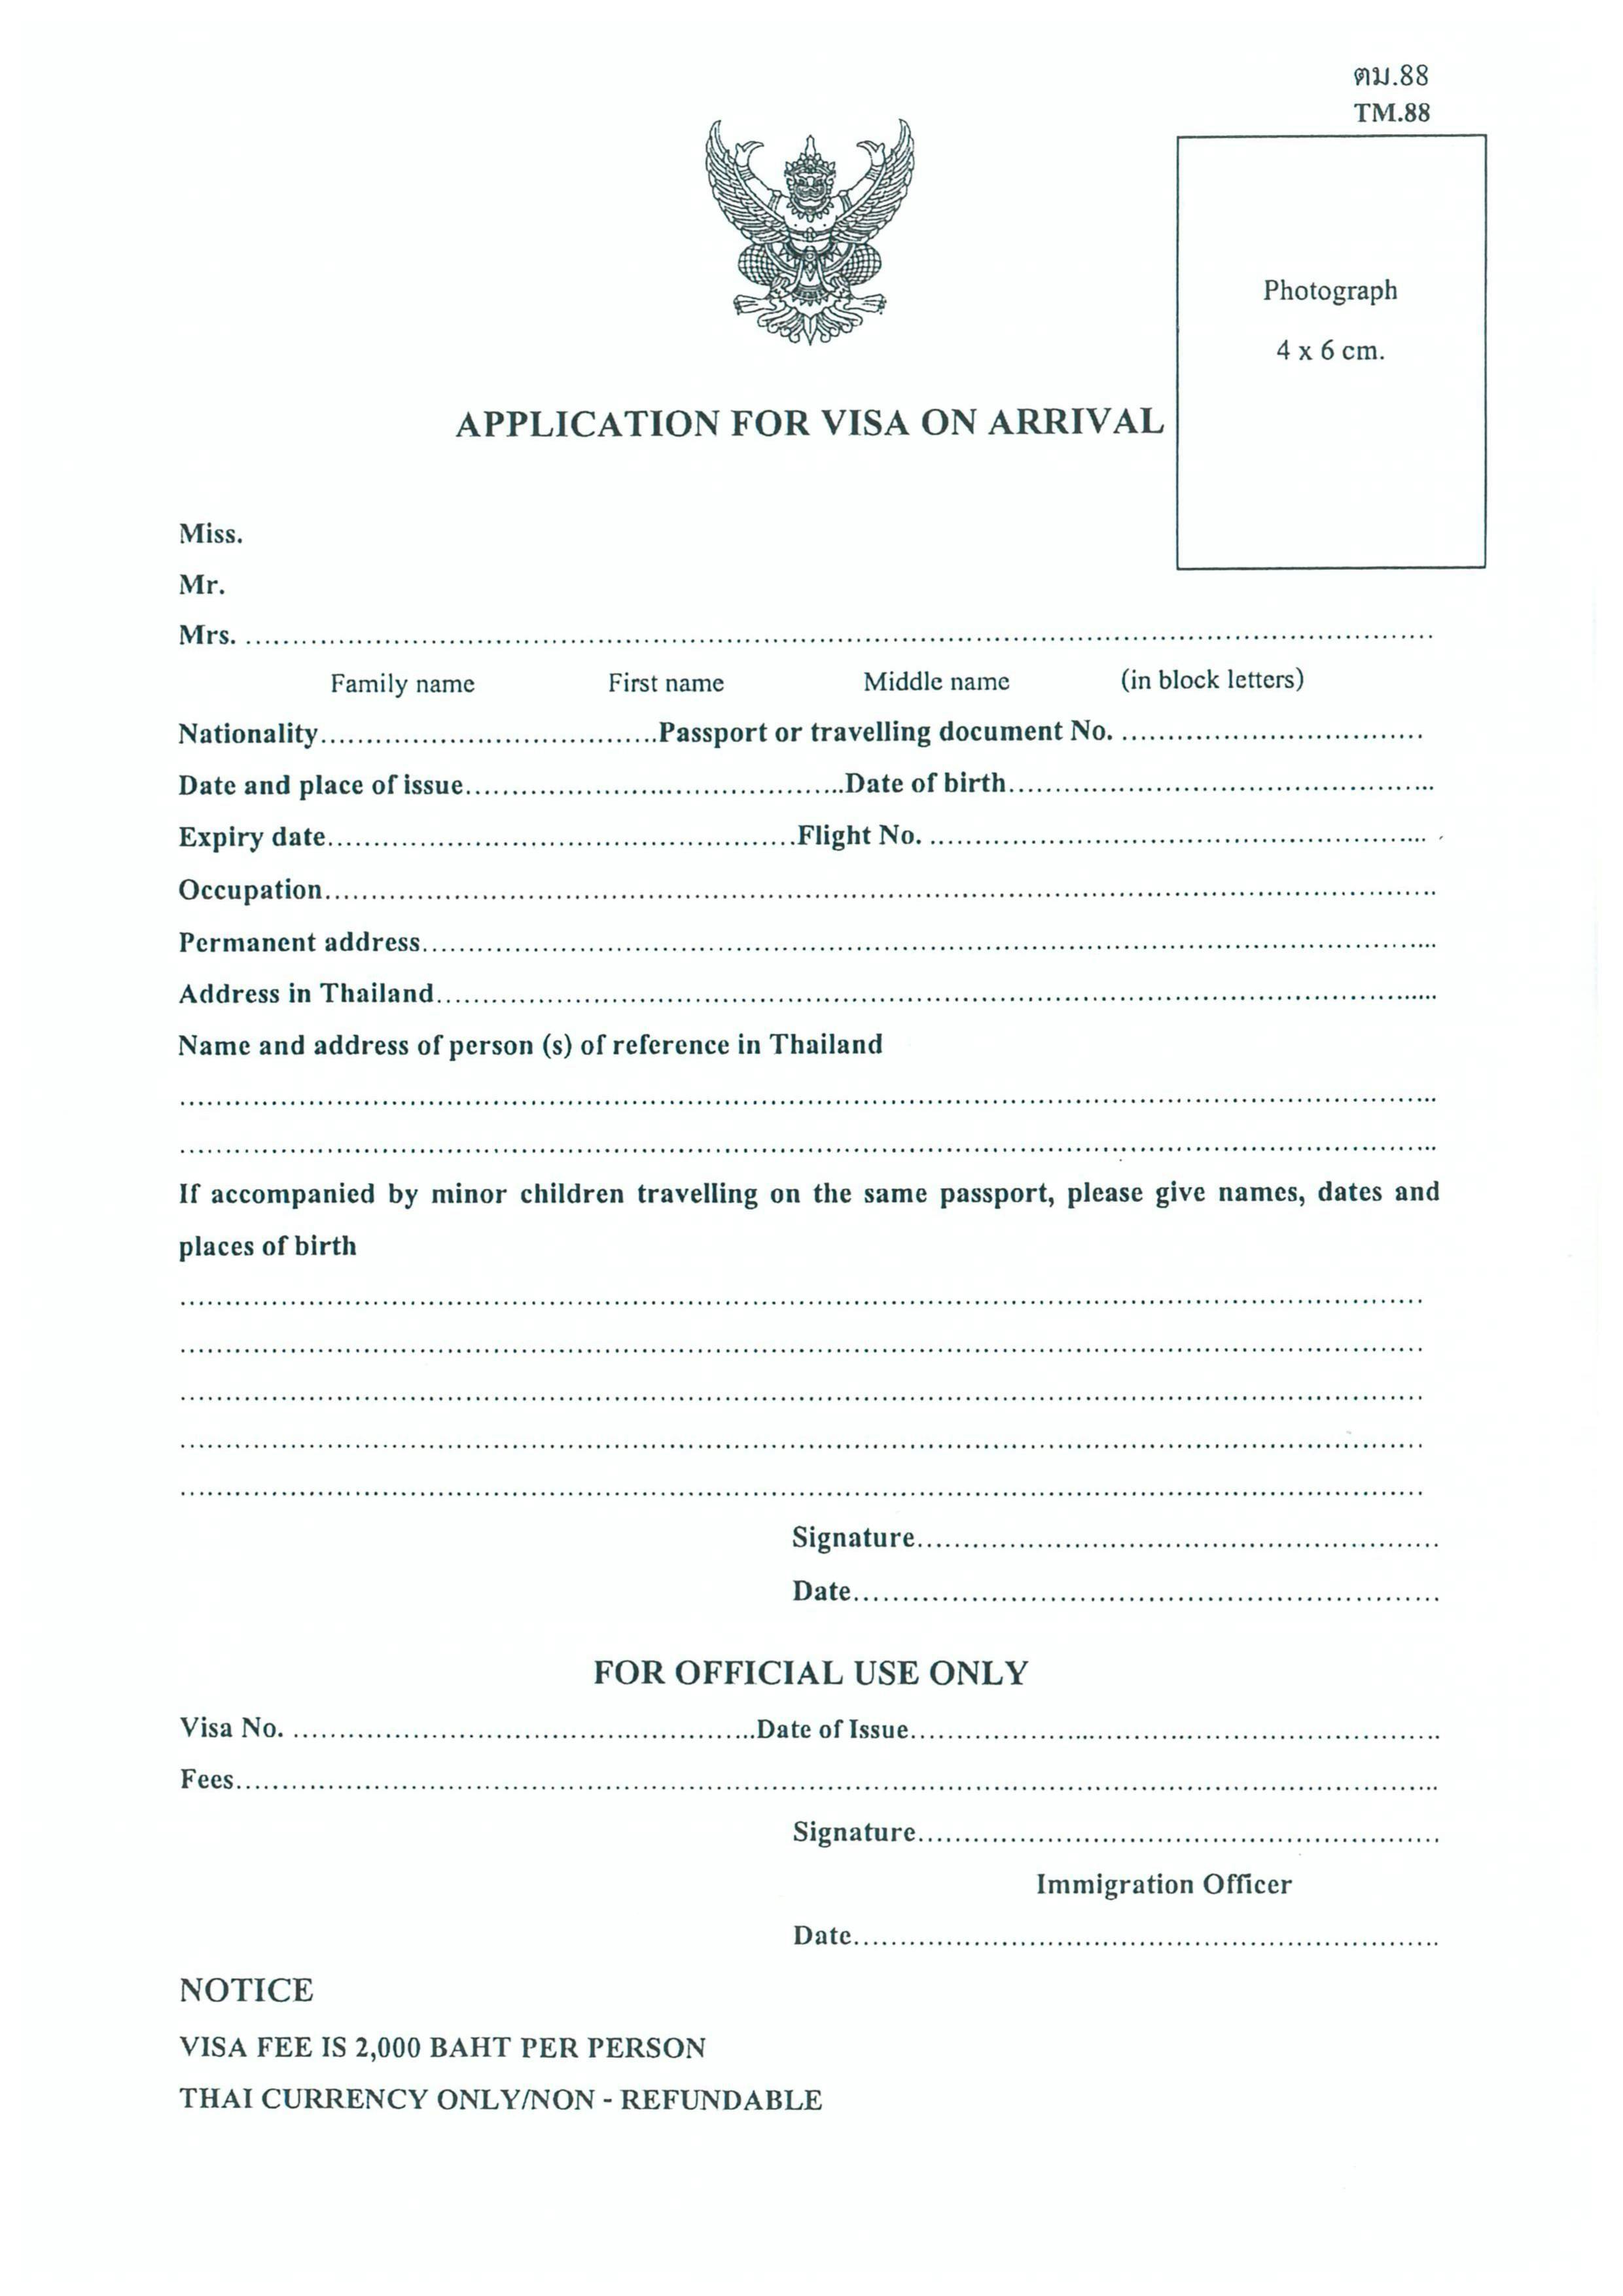 Application for Visa on Arrival with the personal details required